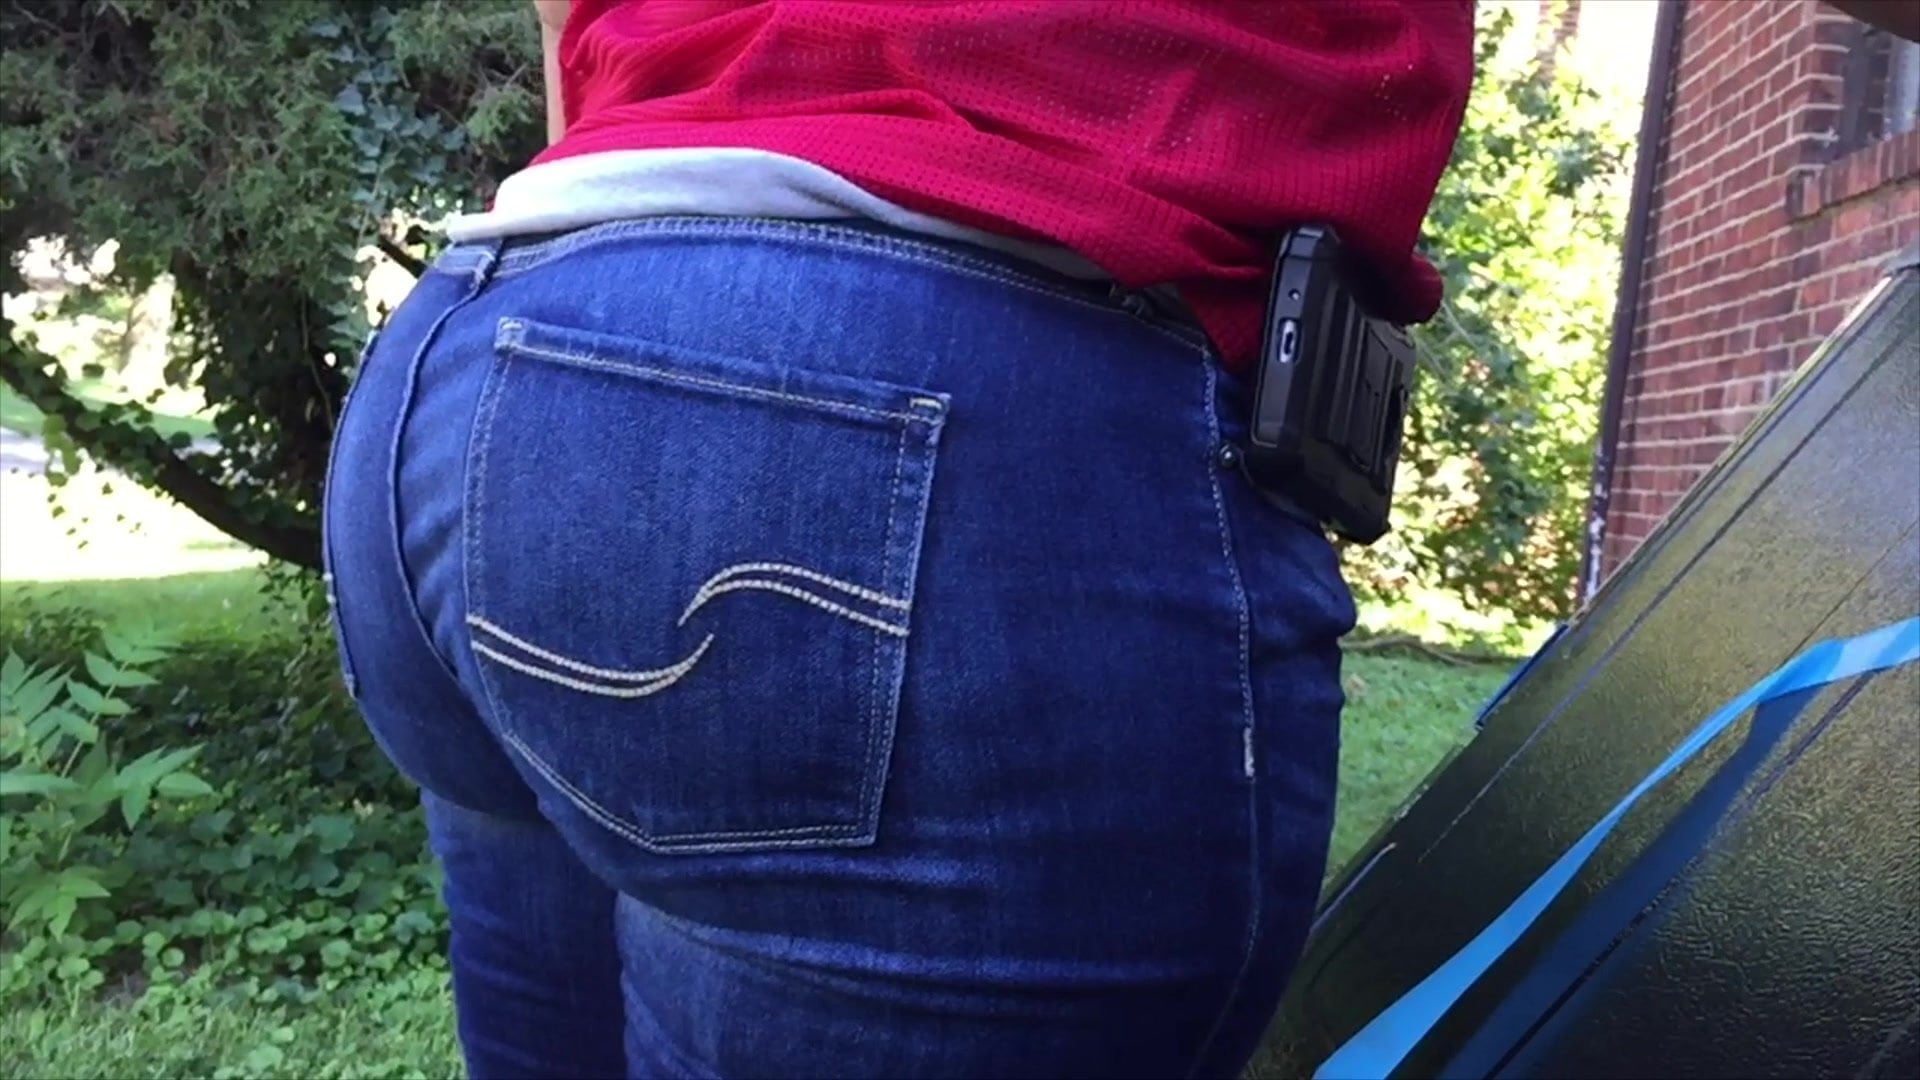 OMG Hips and Ass Big Booty PAWG Tight Jeans 